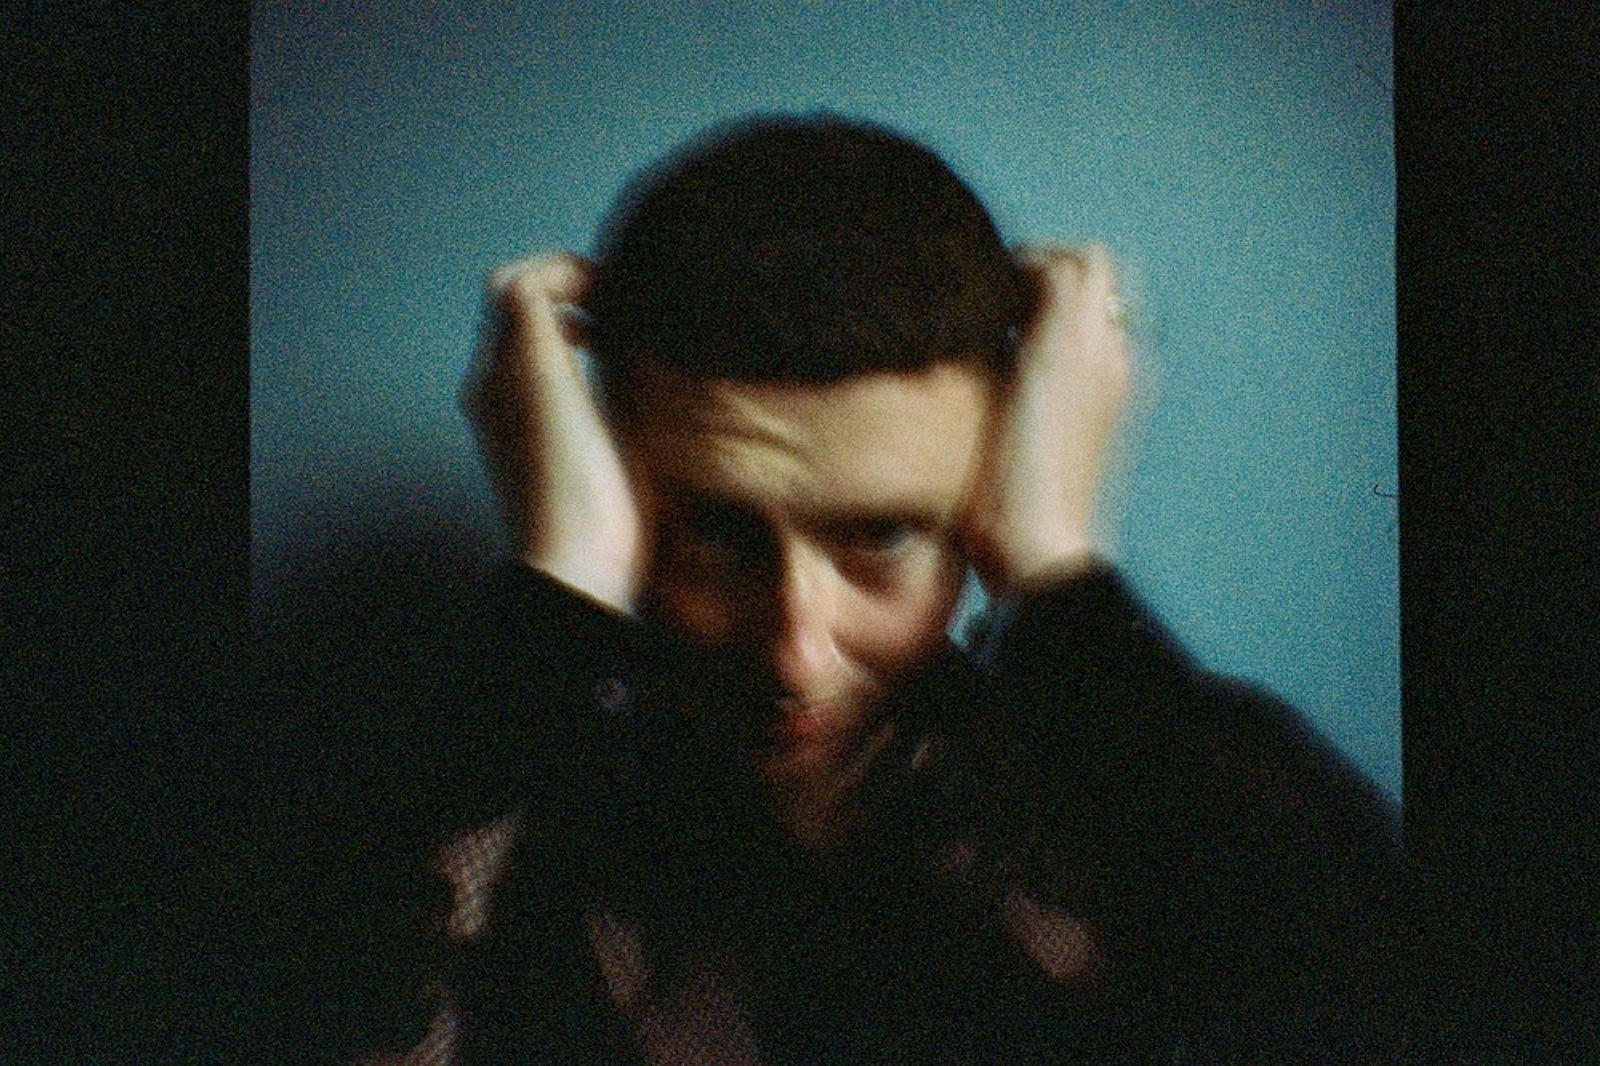 Joesef explores the "right person, wrong time" in new song 'Borderline'